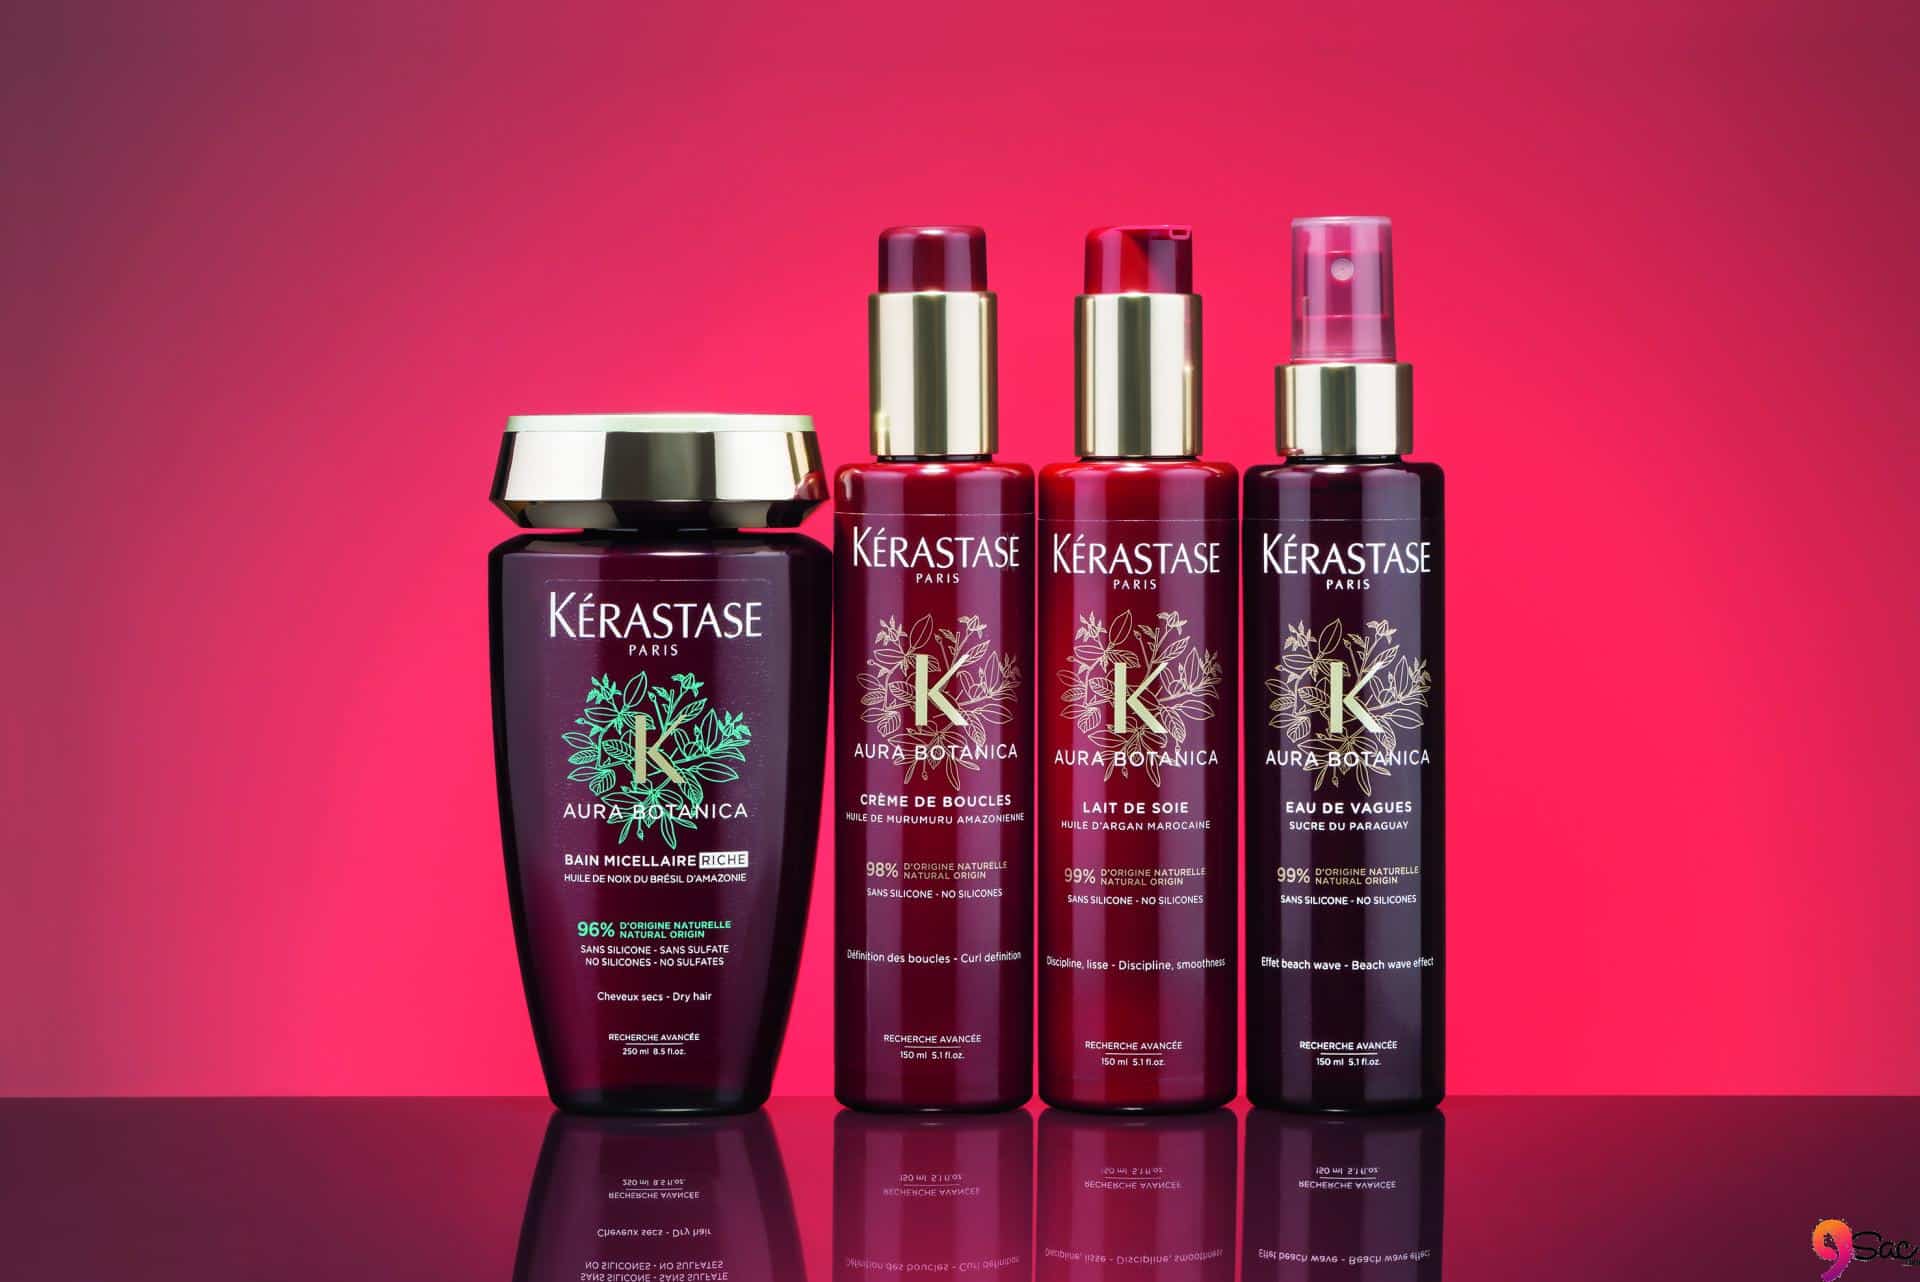 Which Kerastase Product Should I Use to Care For Worn Hair?